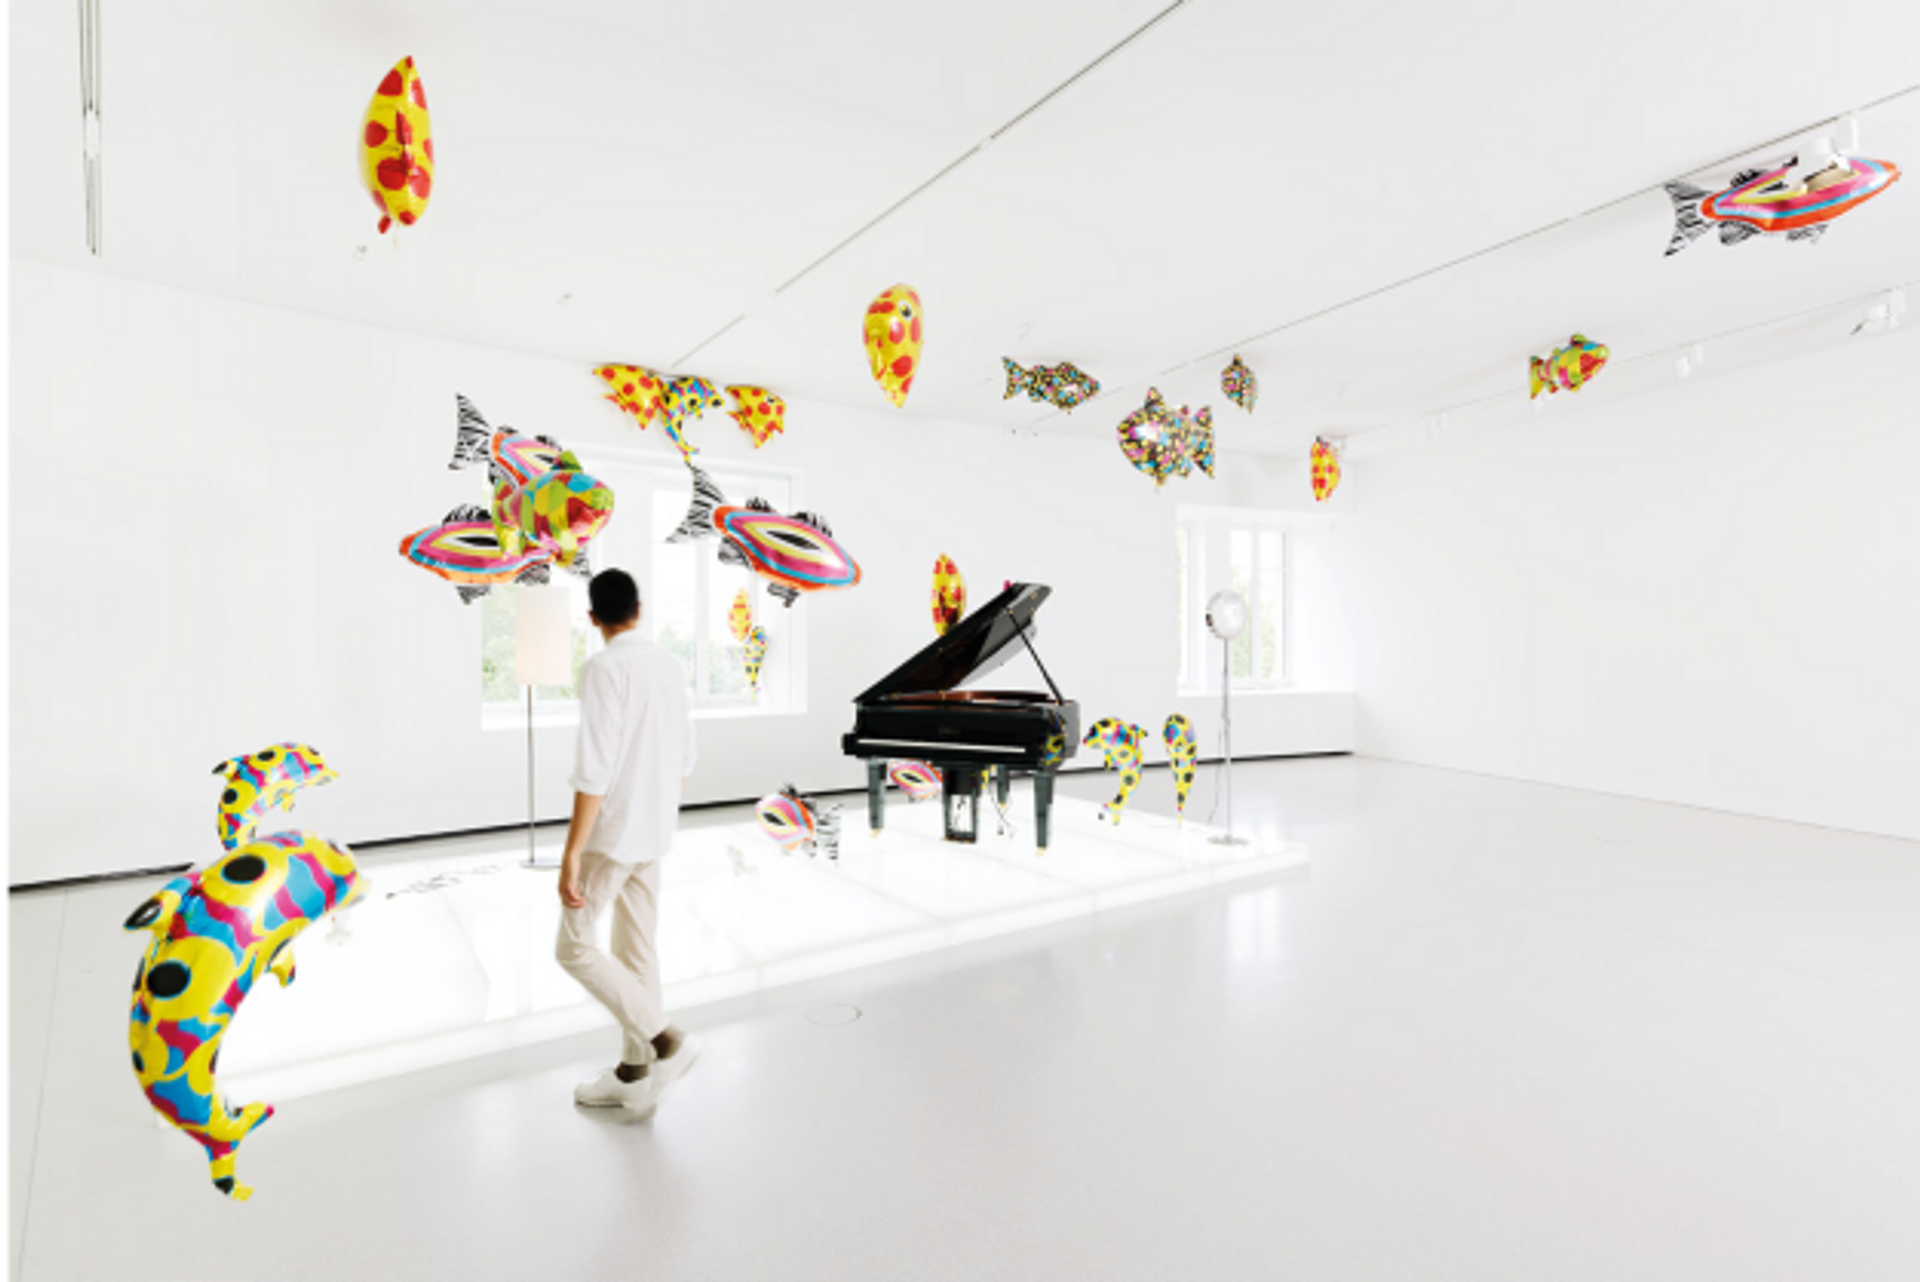 Philippe Parreno, Quasi Objects : My Room is a Fish Bowl, AC/DC Snakes, Happy Ending, Il Tempo del Postino, Opalescent acrylic glass podium, Disklavier Piano, 2014-2022, techniques mixtes.
Courtesy de l’artiste et Pinault Collection